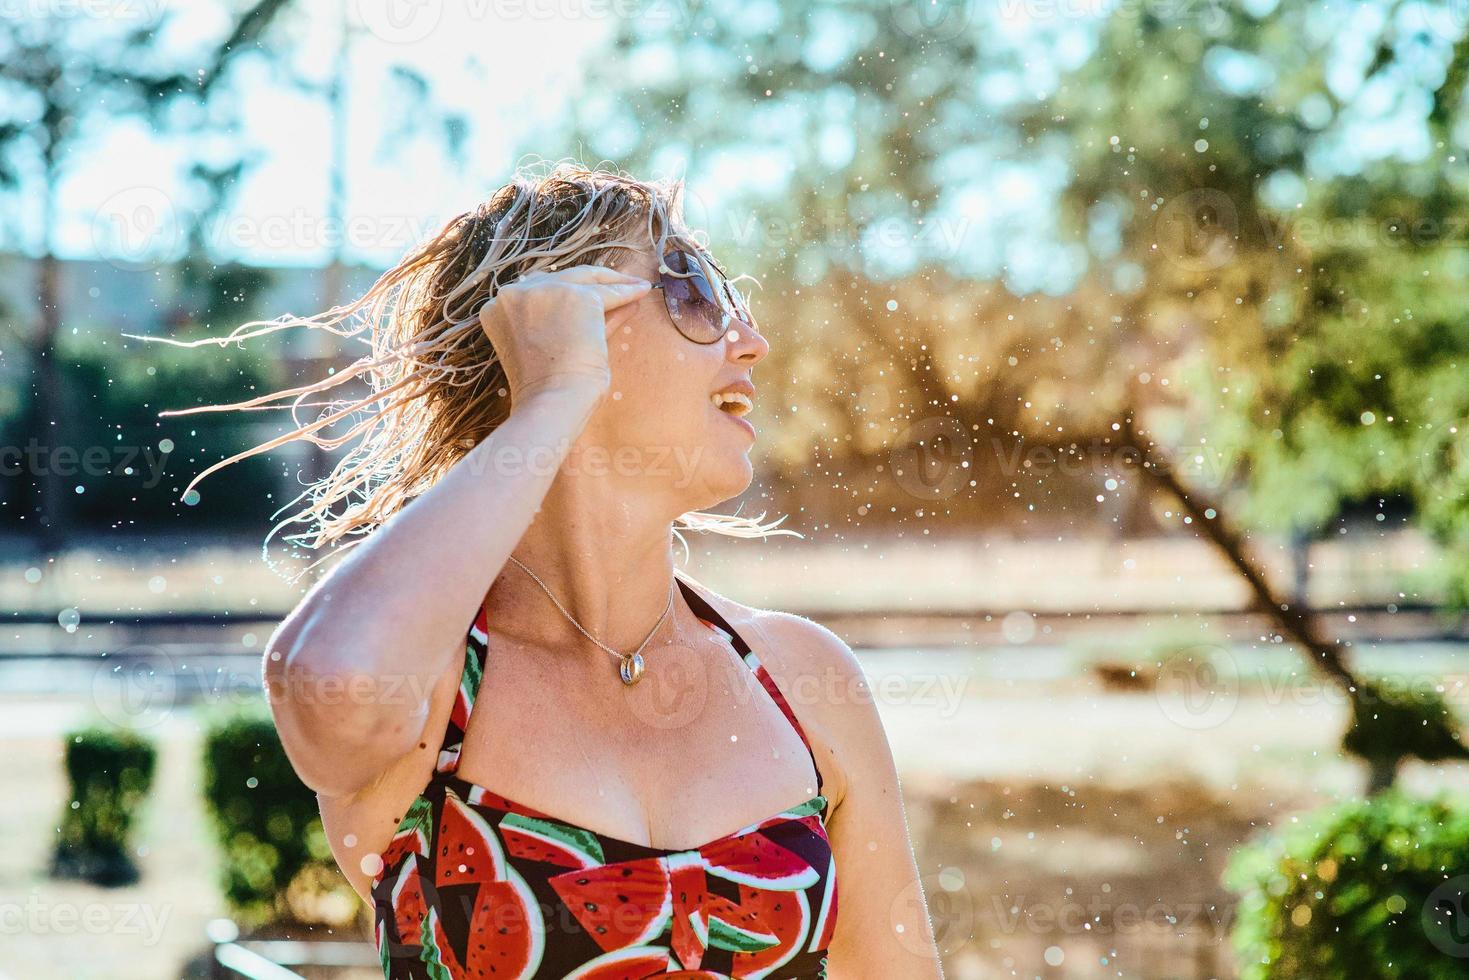 laughing emotional blonde woman with wet hair making water splashes. Holidays, happiness, fun, summer, leisure concept photo